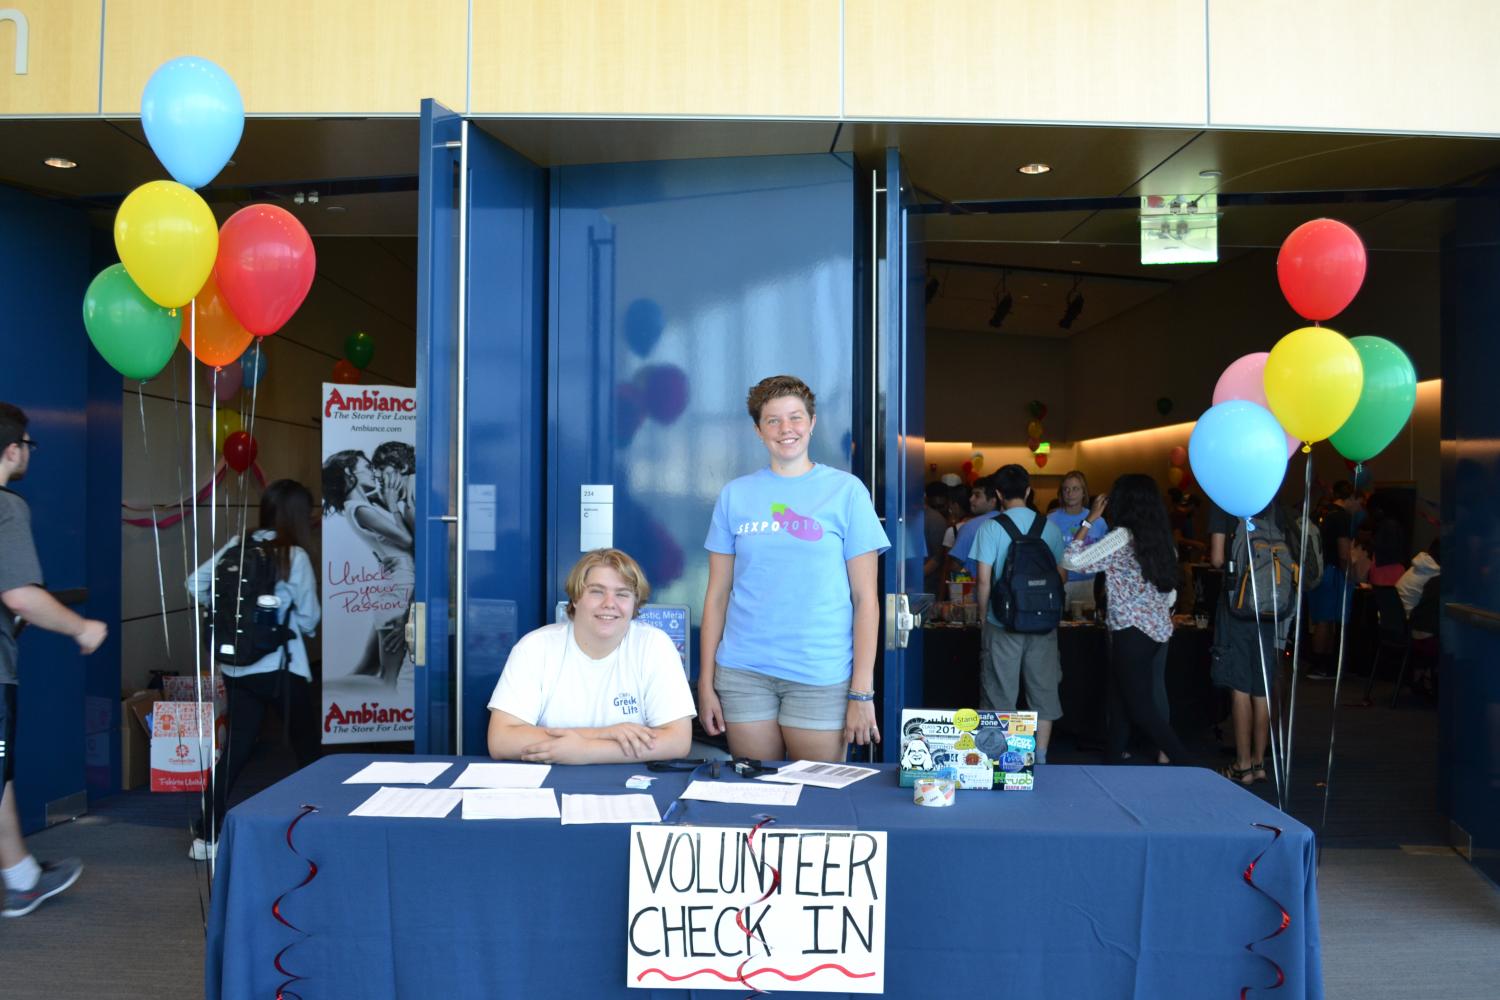 SEXPO aims to foster a safe place where students can learn about sex and sexual health. Many student groups and groups from outside of CWRU participate.